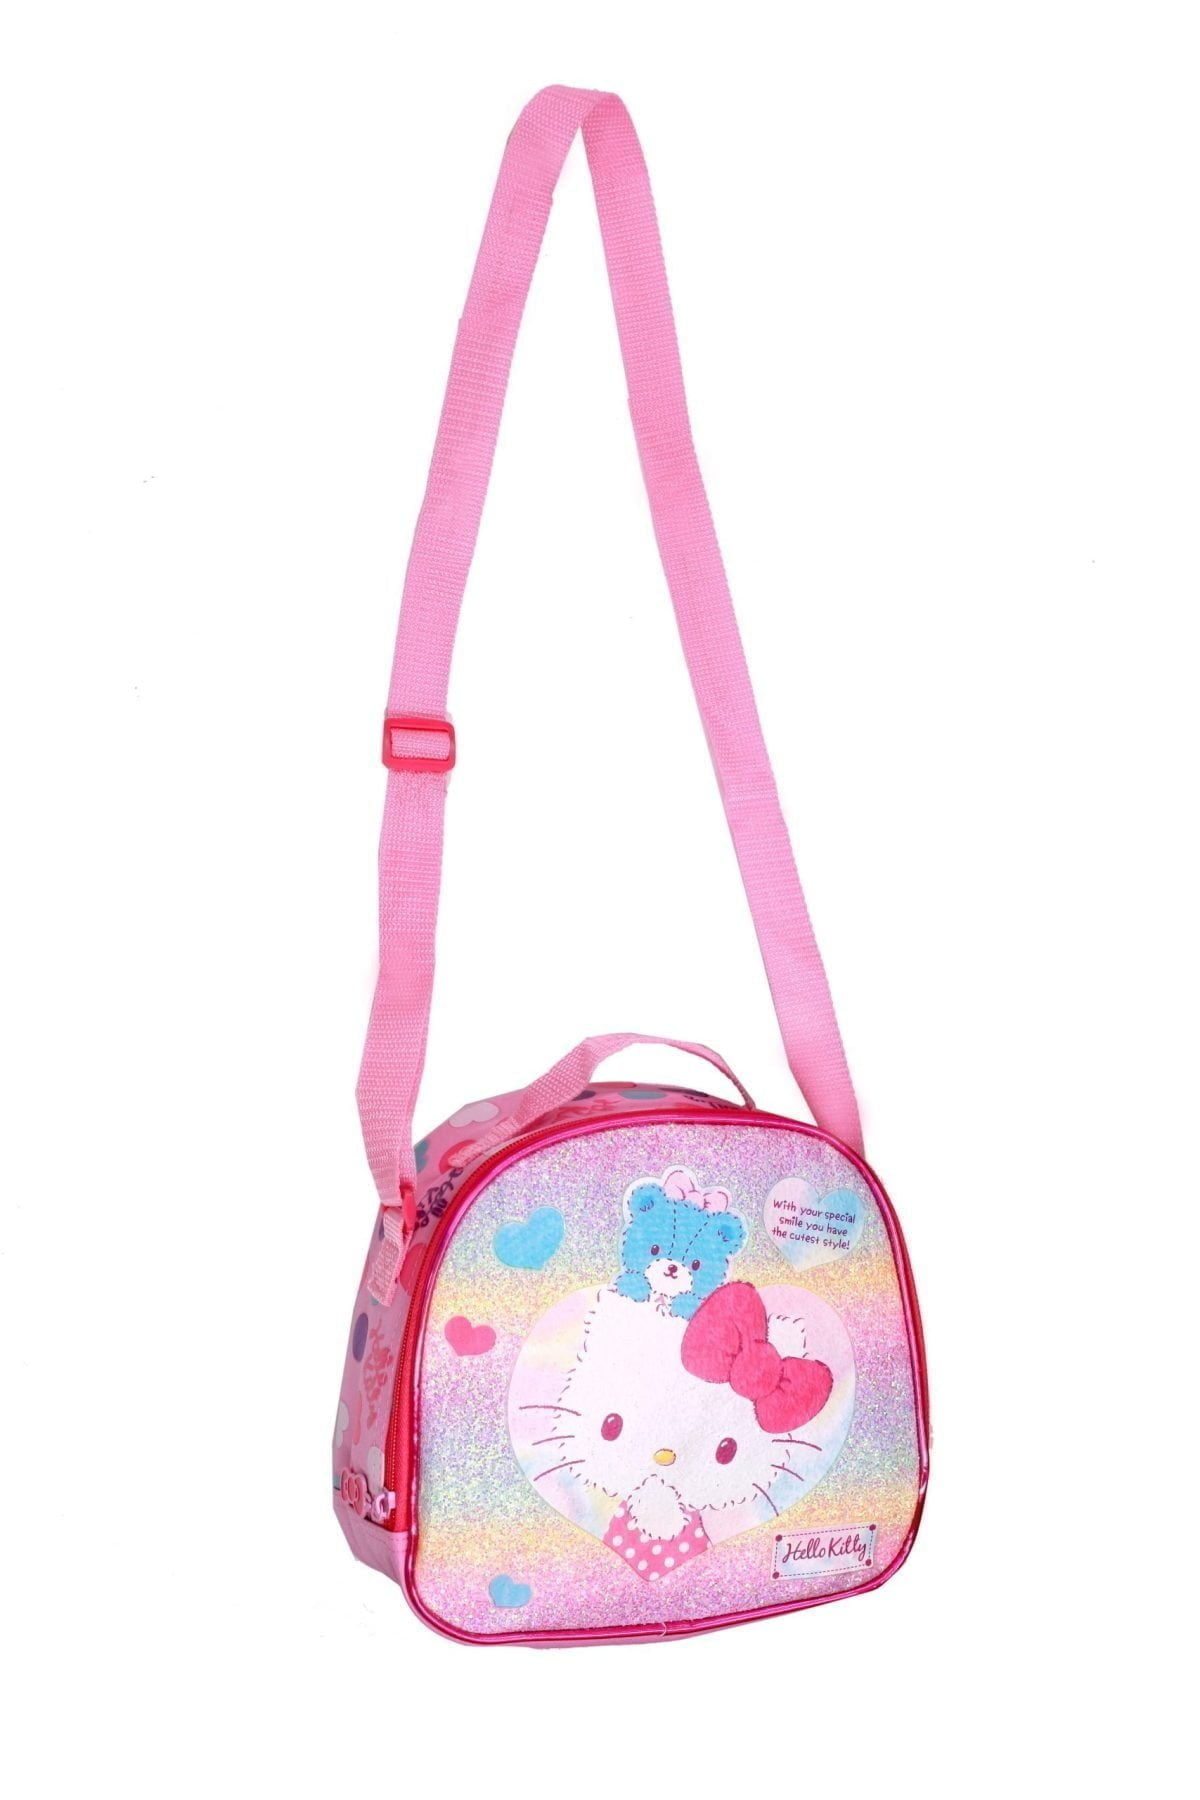 Hk671 230 2 Scaled Hello Kitty Make Your Kids  Lunch More Fun By Using This Stylish Lunch Bag. This Spacious Bag Can Fit Most Standard Sized Lunch Boxes. Add More Flavor And Become The Center Of Attraction When You Take Out This Bag. &Lt;Ul&Gt; &Lt;Li&Gt;Stylish Lunch Bag&Lt;/Li&Gt; &Lt;Li&Gt;Spacious&Lt;/Li&Gt; &Lt;Li&Gt;Can Fit Most Standard Lunch Boxes&Lt;/Li&Gt; &Lt;/Ul&Gt; Hello Kitty Hello Kitty Insulated Lunch Bag (Hk671)